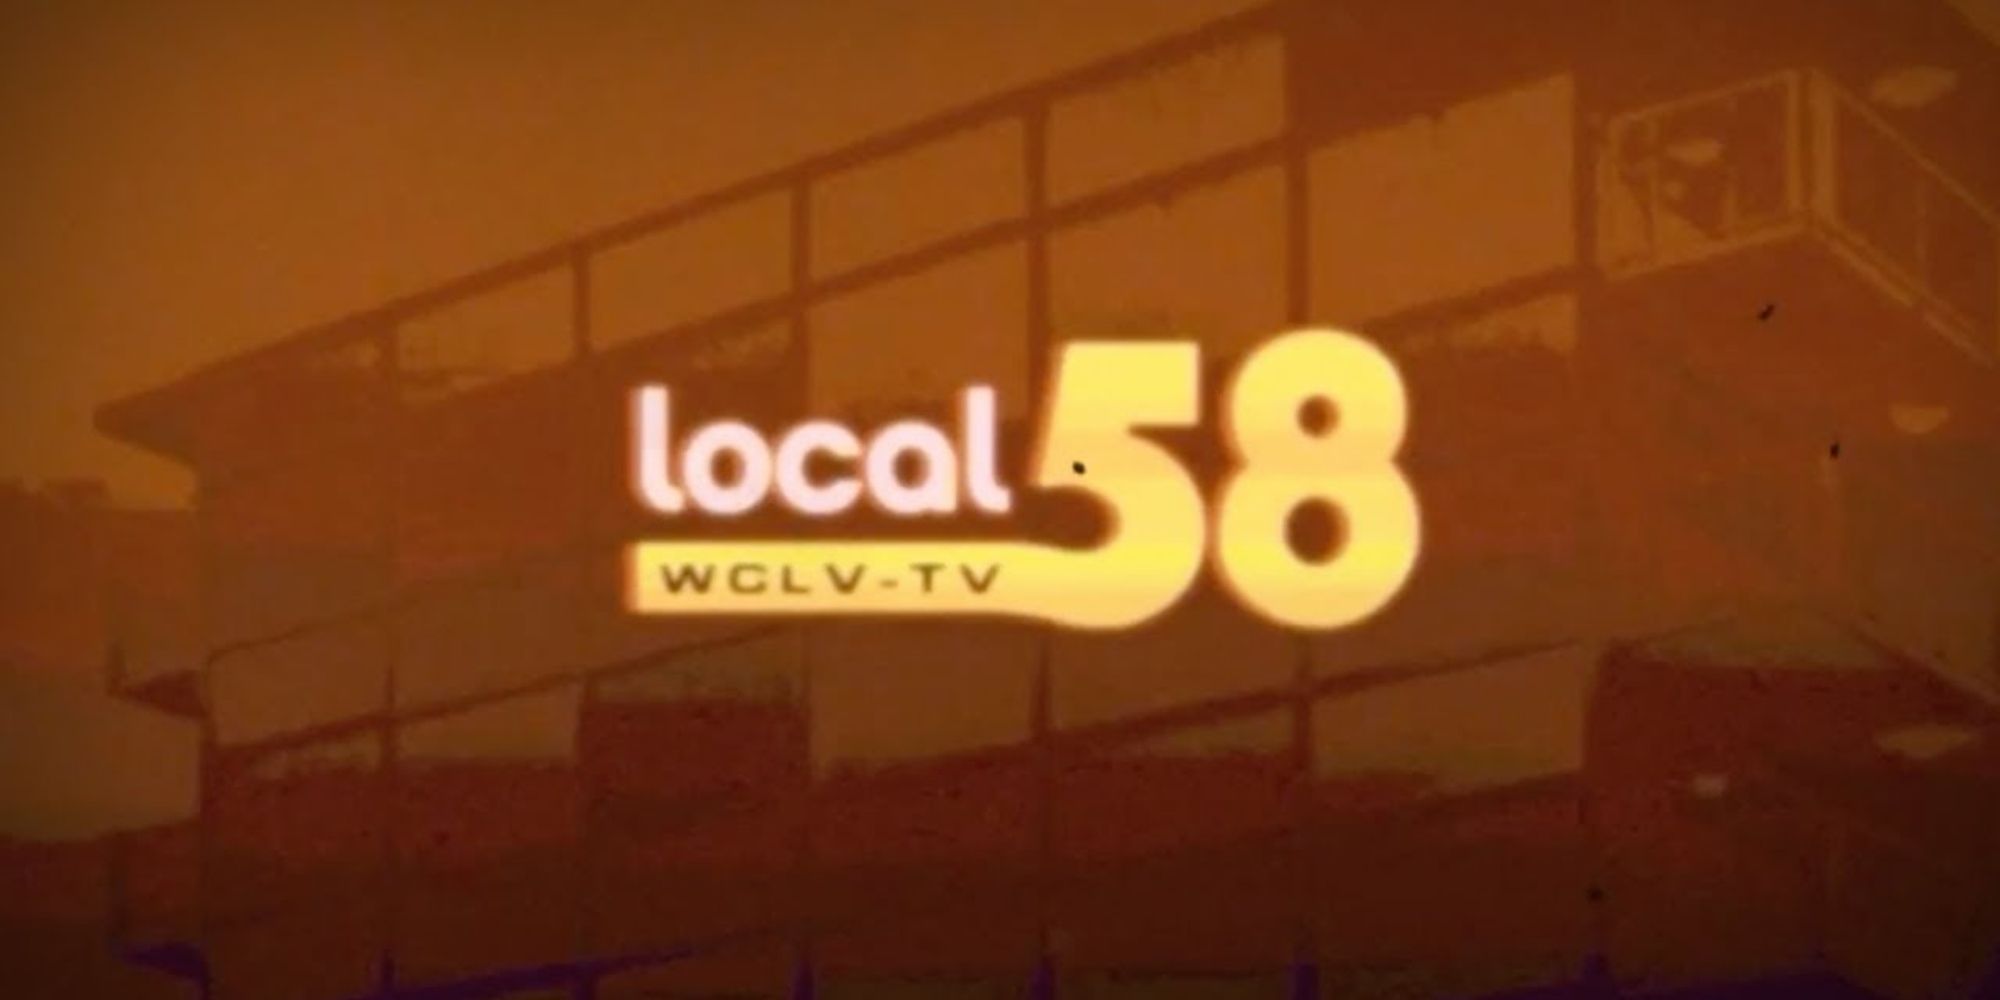 Logo for the Local 58 television channel